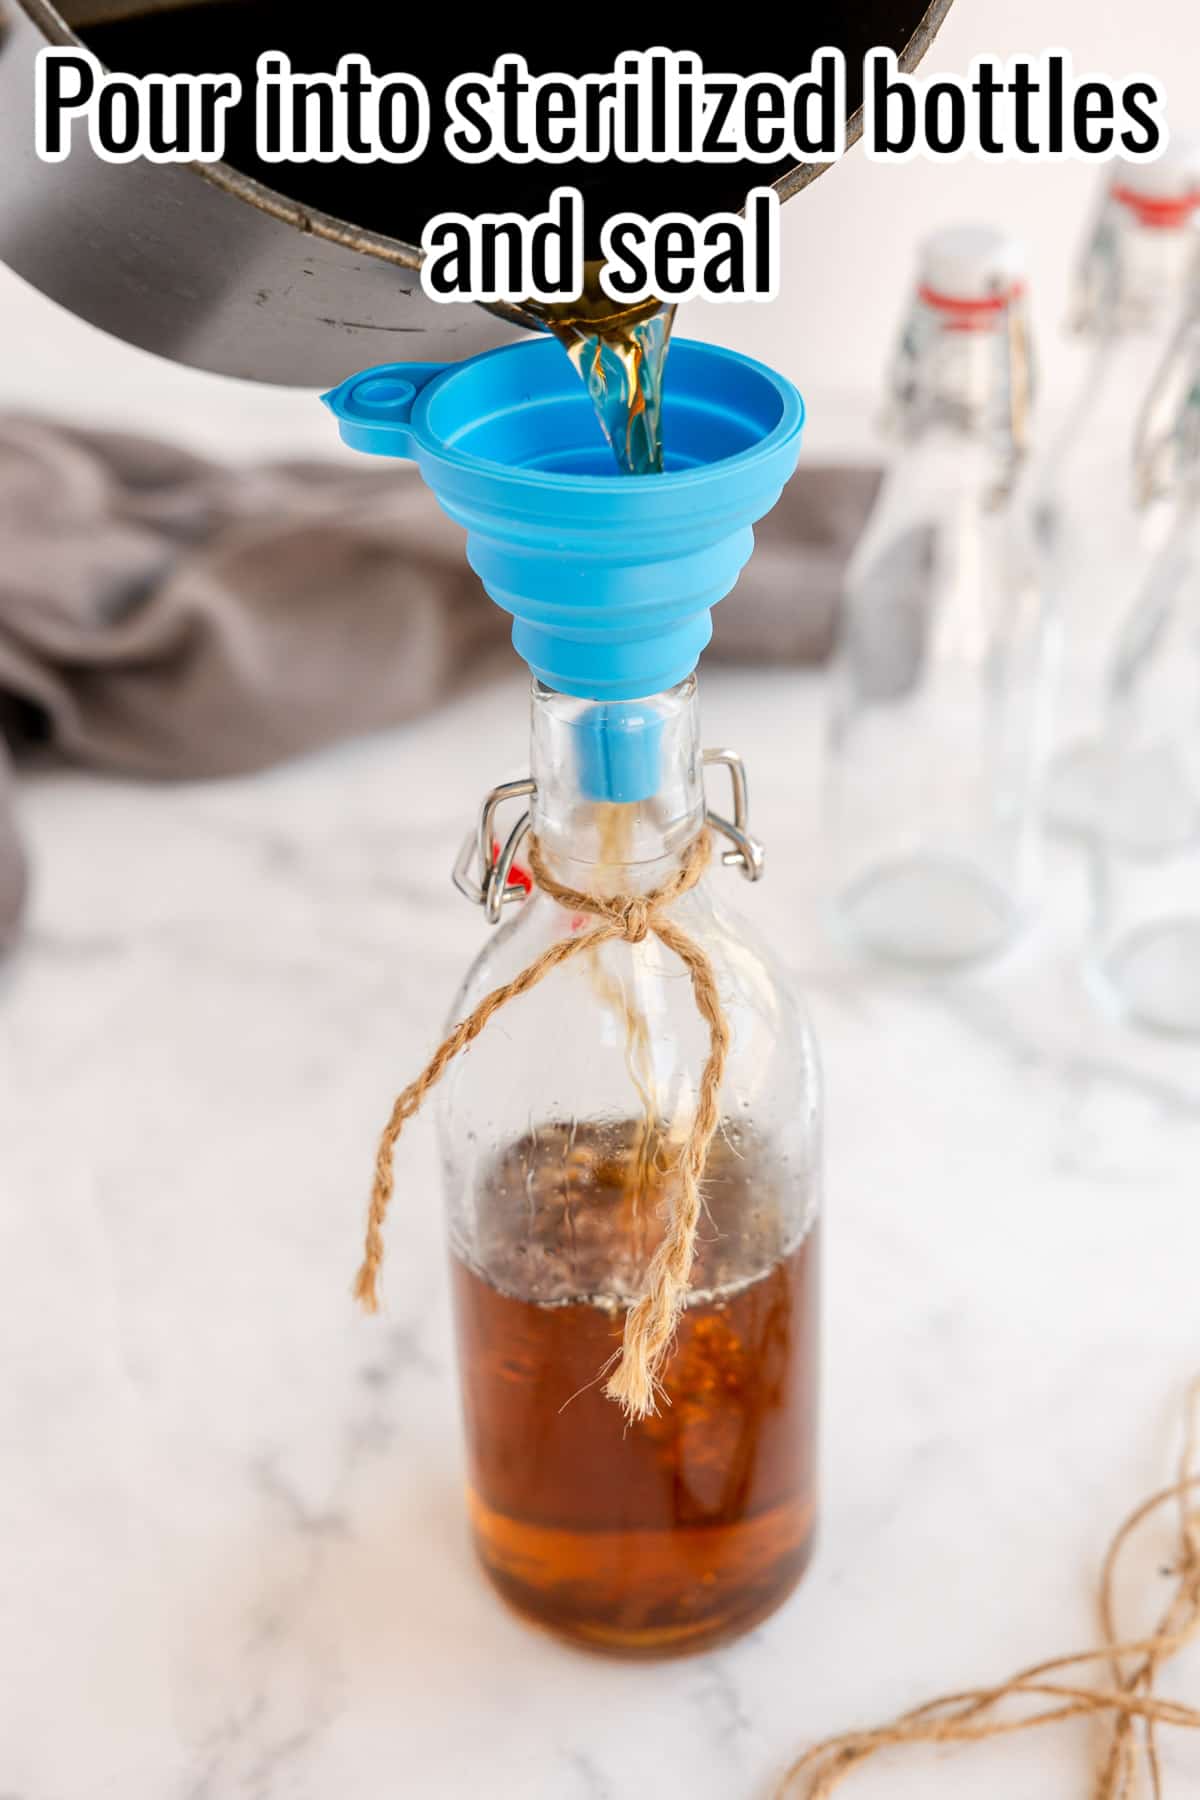 process image showing homemade amaretto being poured into a glass bottle with a funnel.